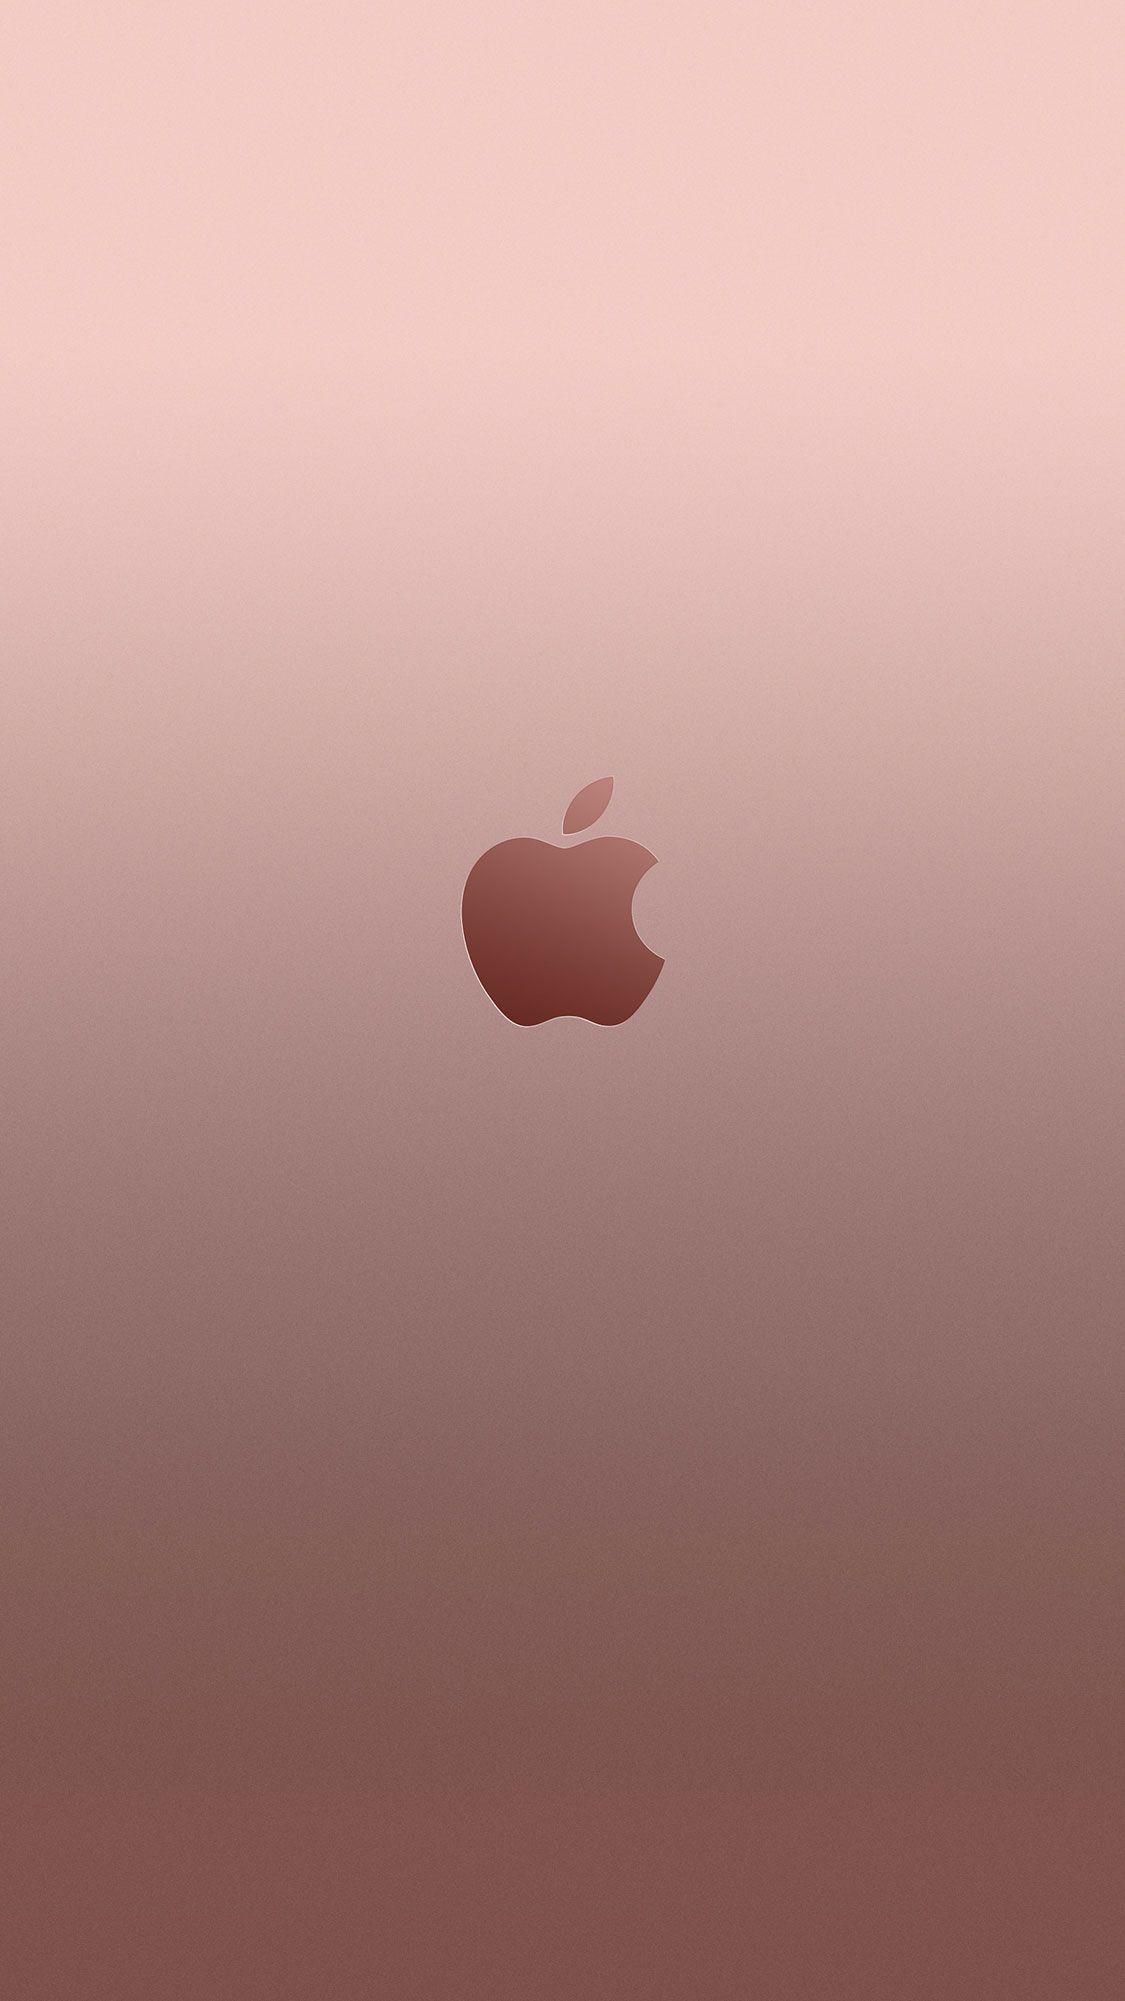 New iPhone 6 & 6S Wallpaper & Background in HD Quality. iPhone 6s wallpaper, Apple wallpaper, Rose gold wallpaper